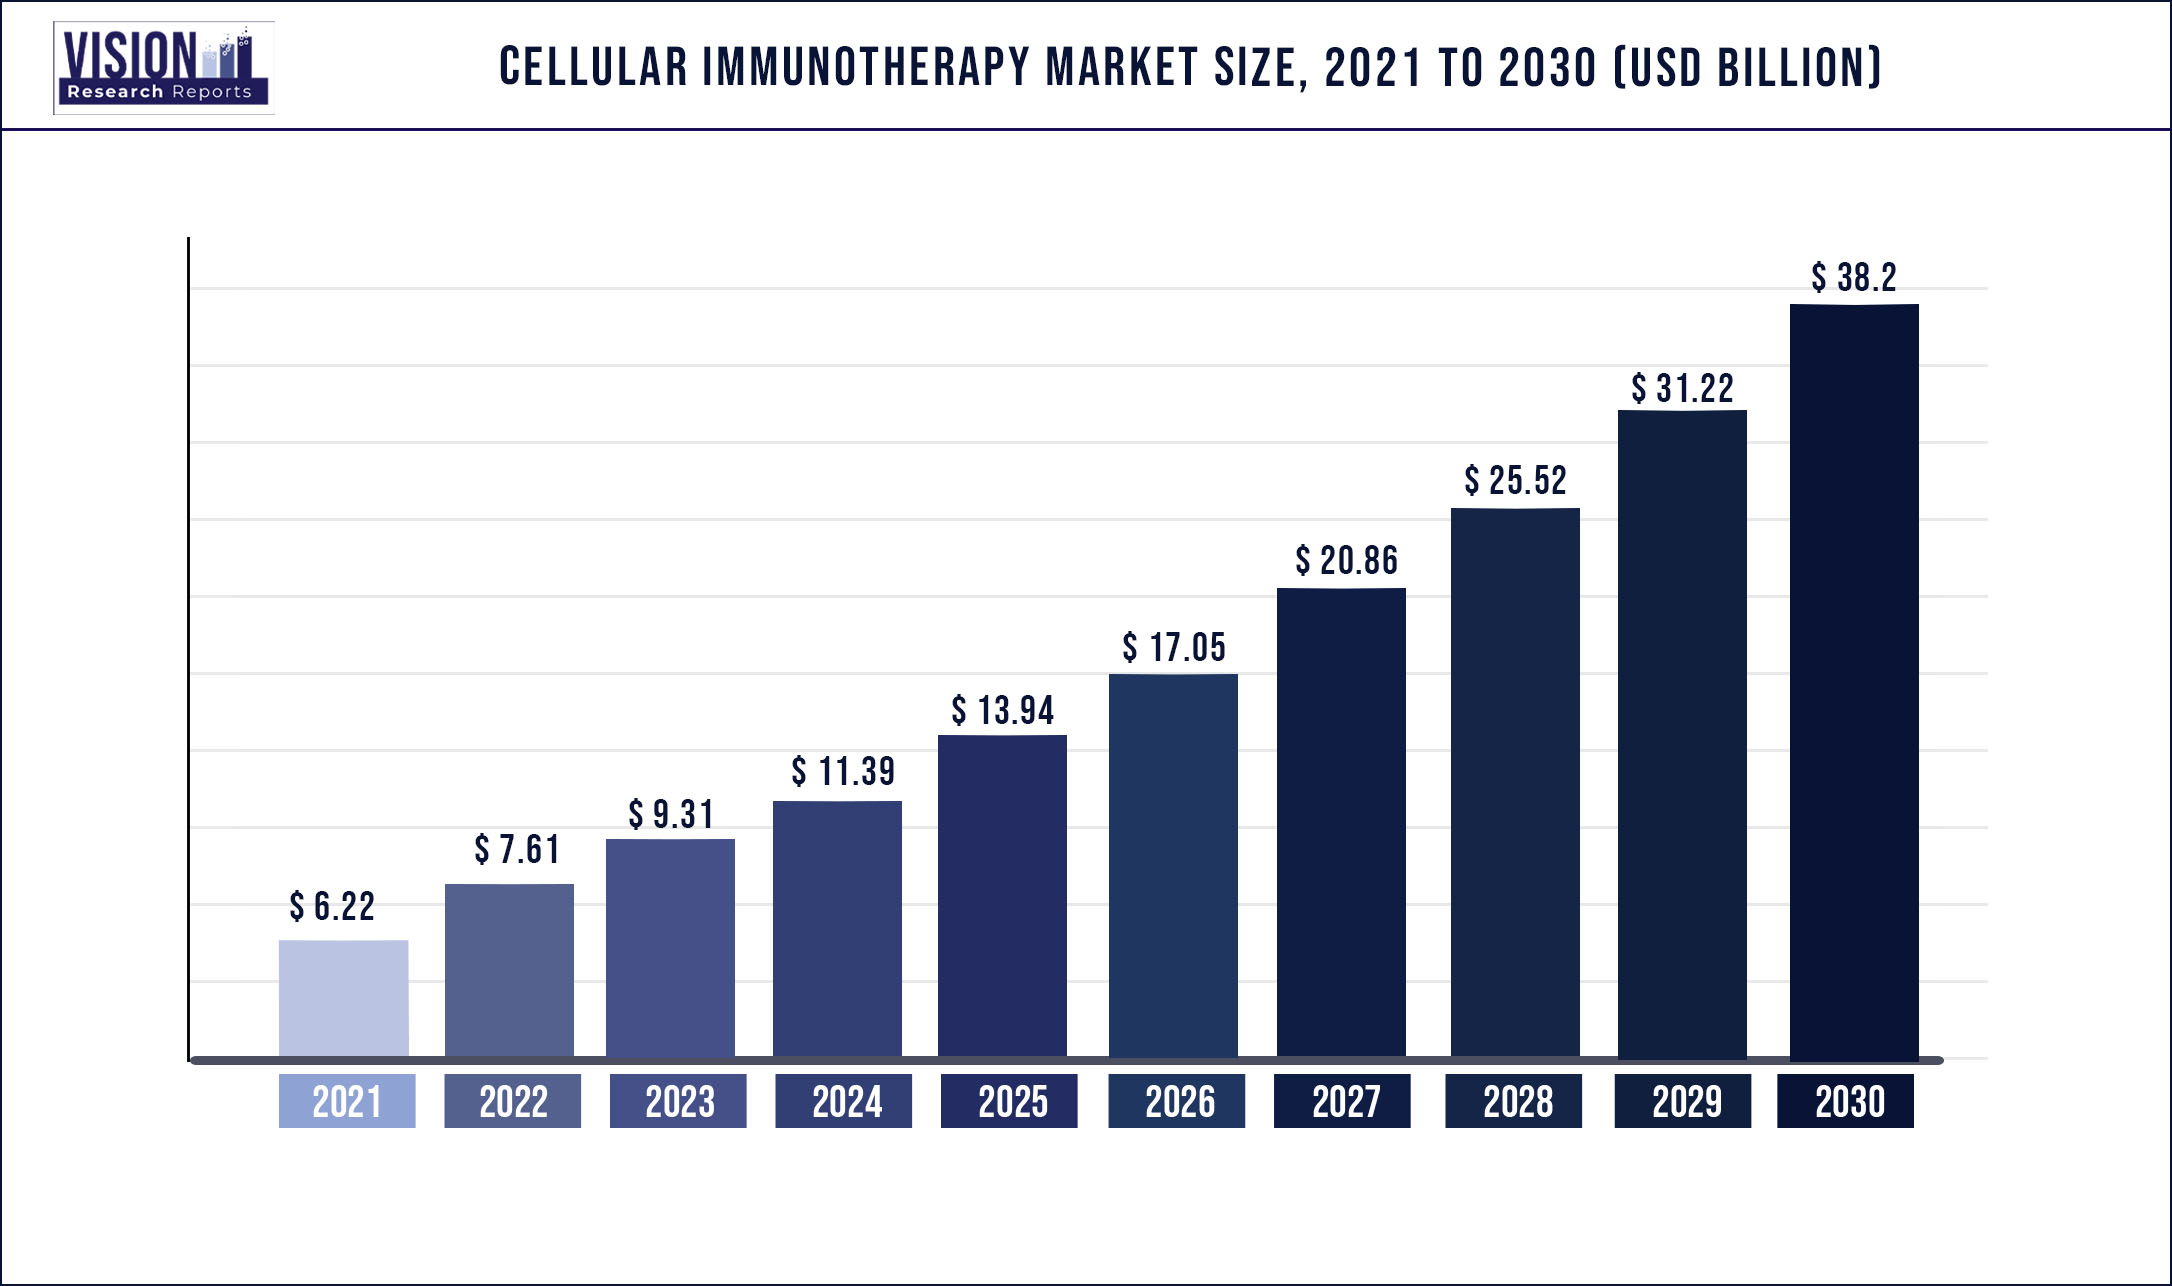 Cellular Immunotherapy Market Size 2021 to 2030